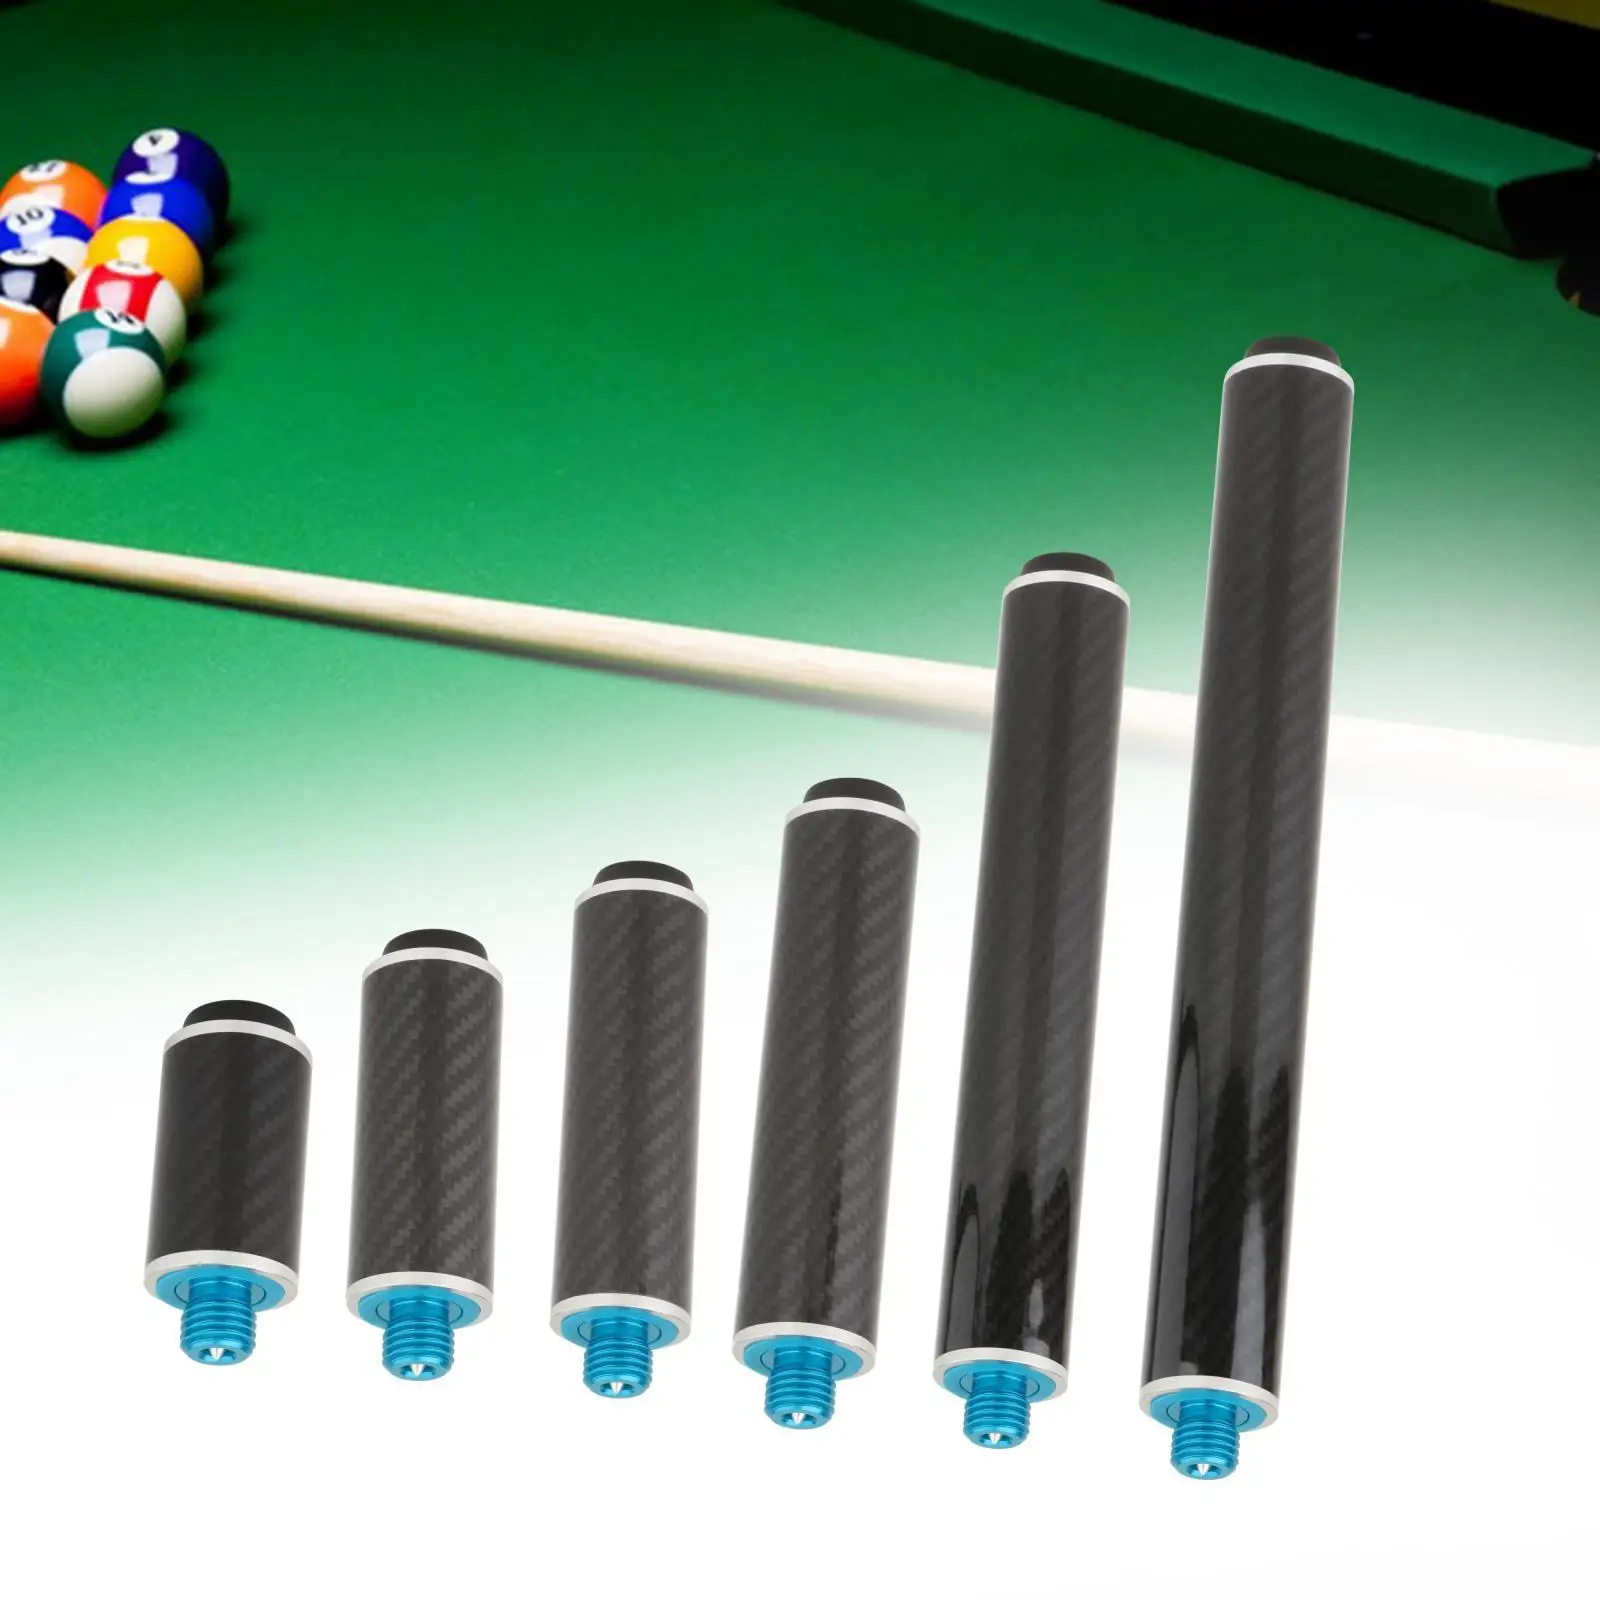 Snooker Cue Stick Extender Cue Extended Compact Lovers Cue End Lengthener Billiard Cue Bottom Plug Billiards Pool Cue Extension